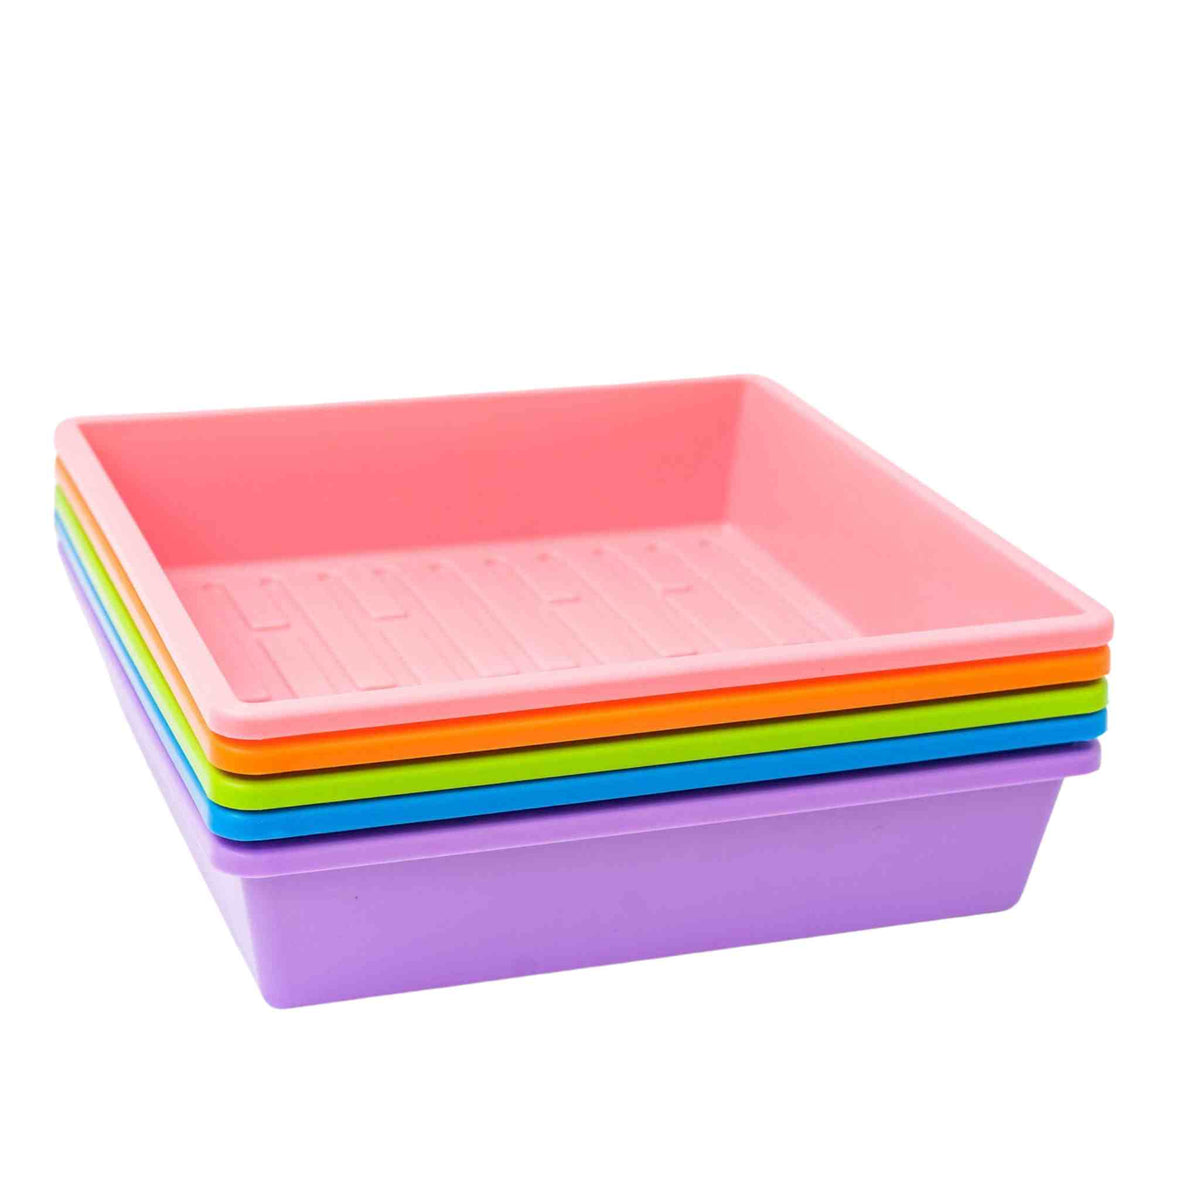 Tradineur 10x22x36 Large Plastic Tray with Handle - AliExpress